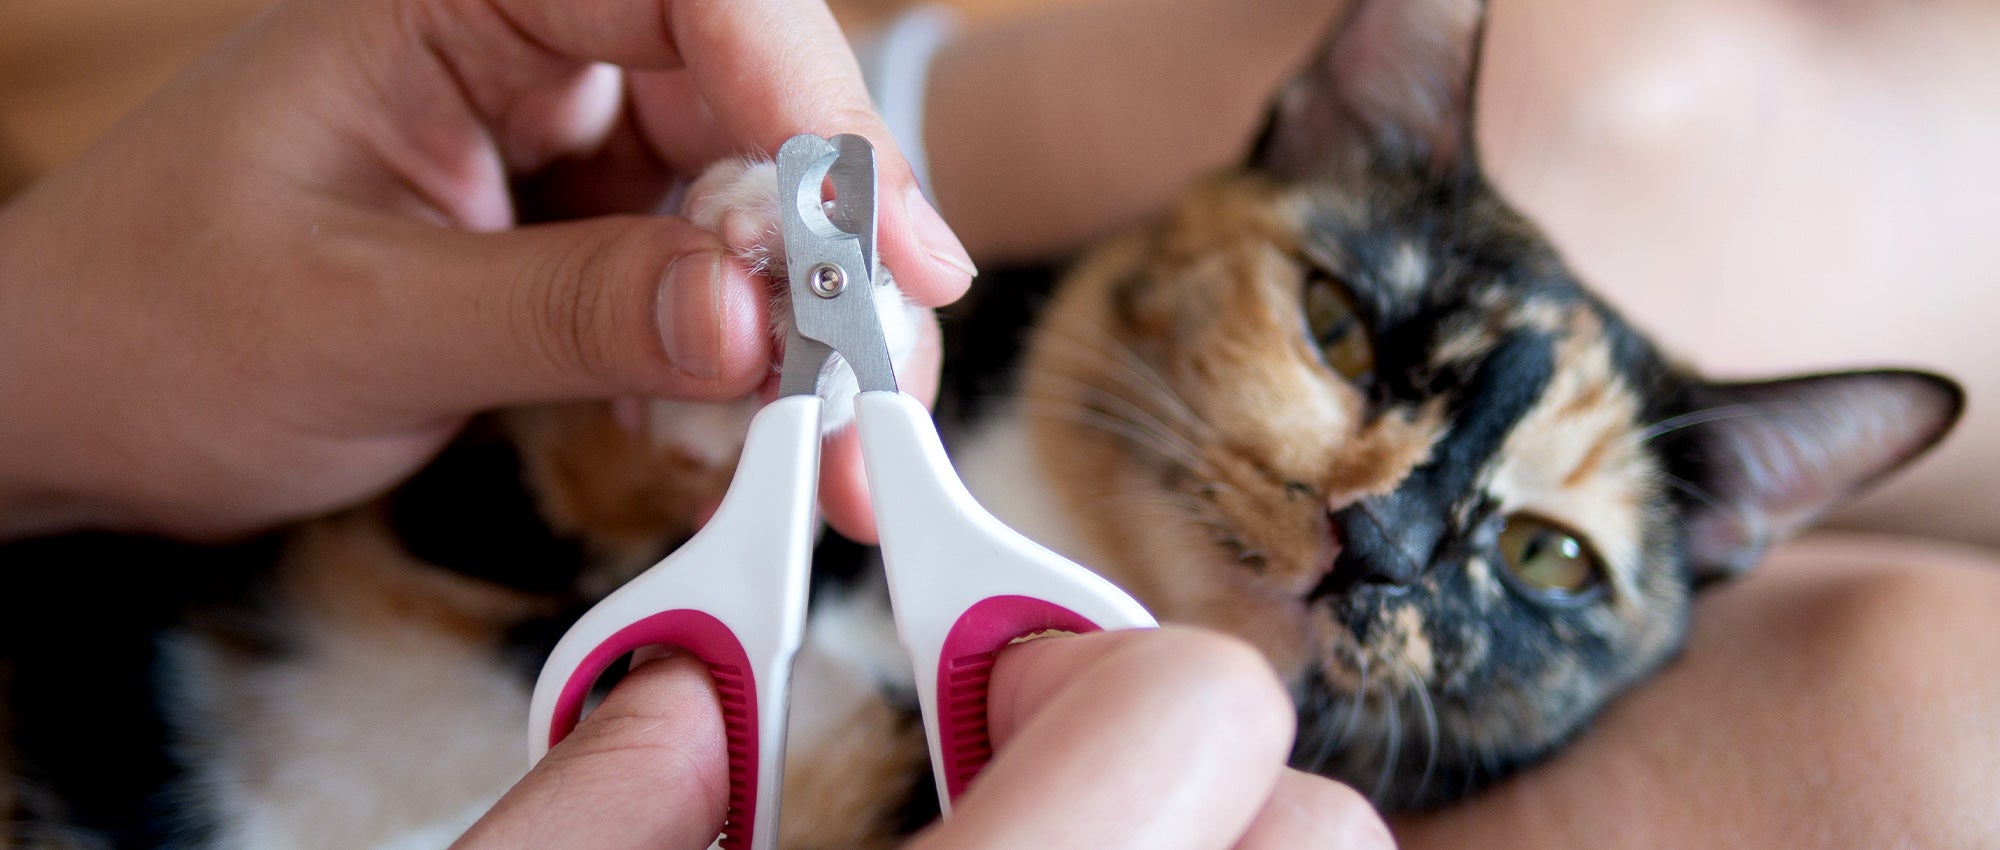 How to trim cat claws | The Humane Society of the United States